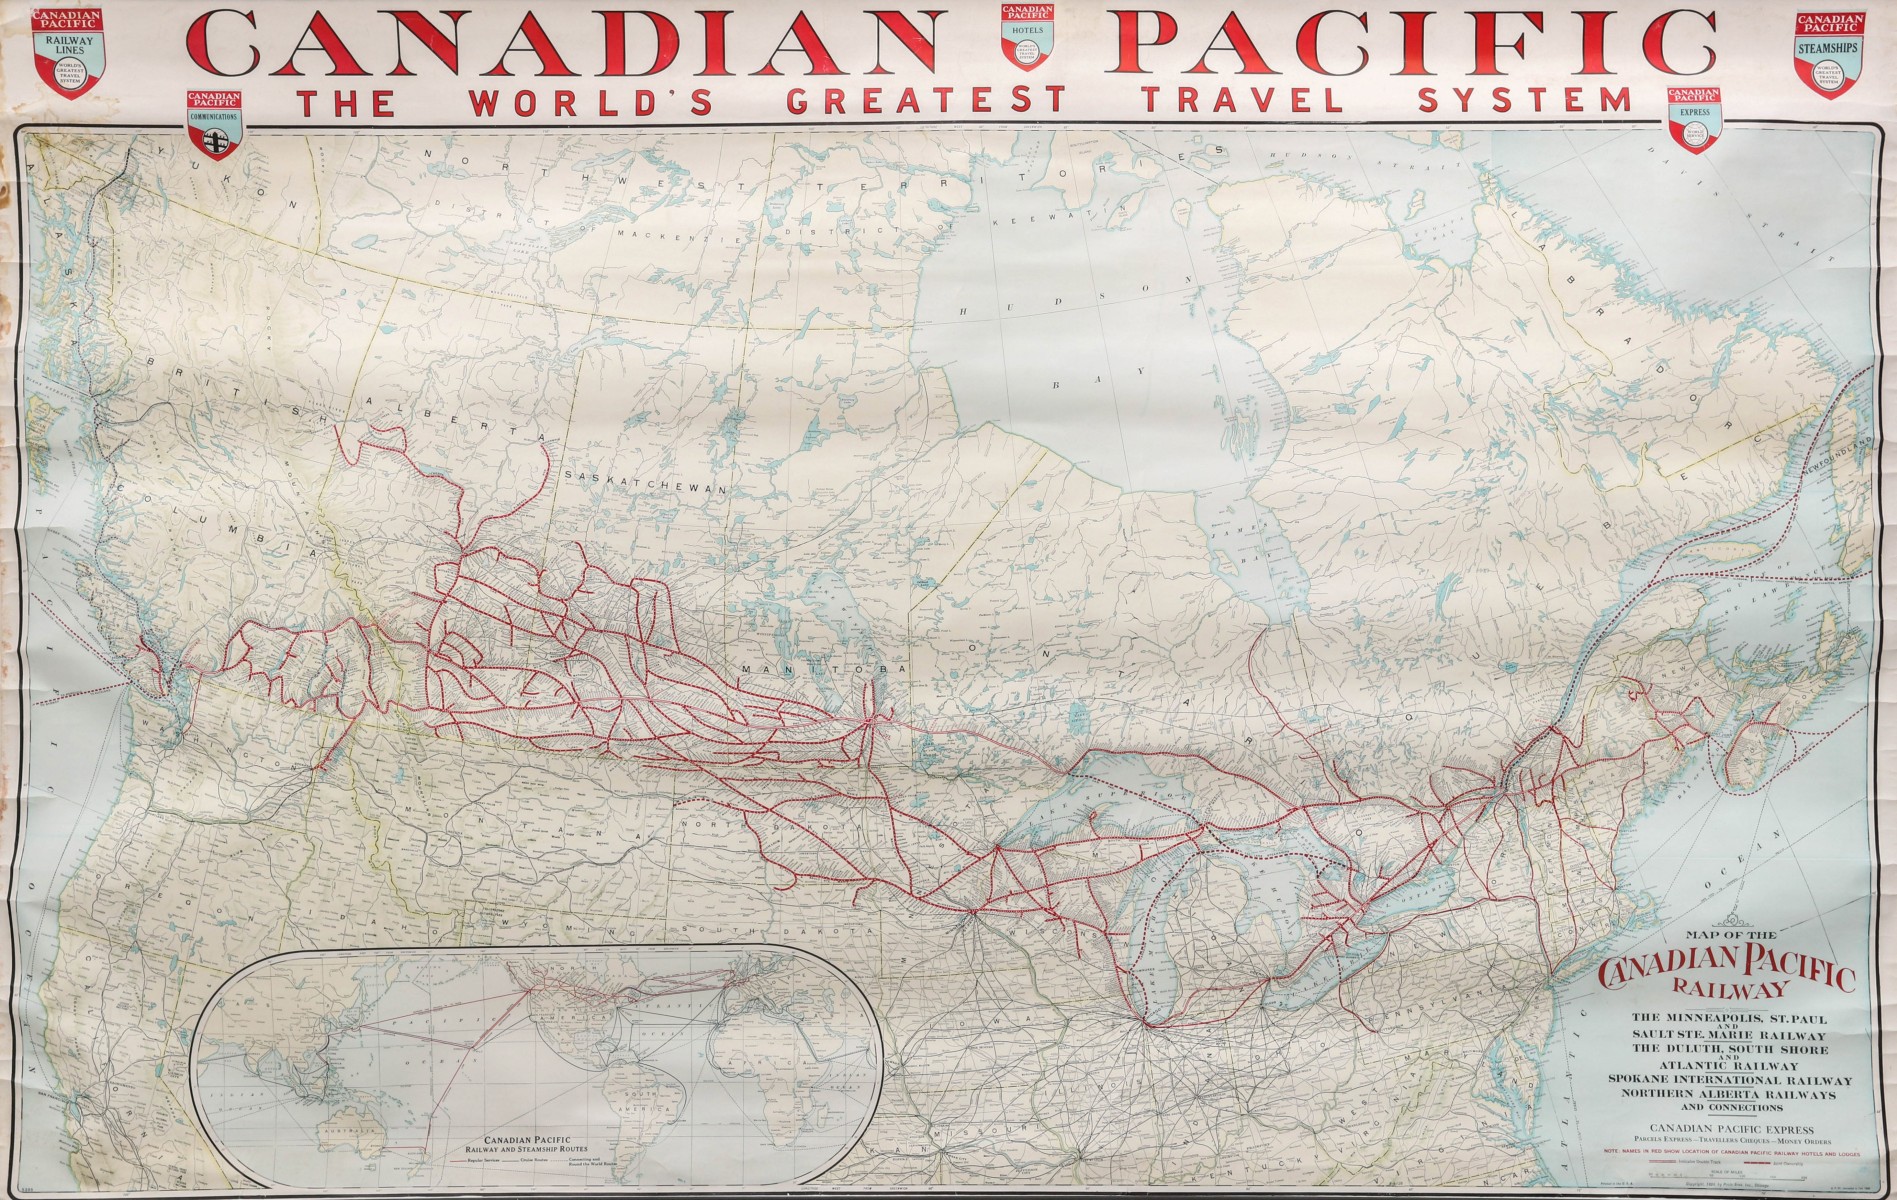 A 1938 CANADIAN PACIFIC RAILWAY WALL MAP